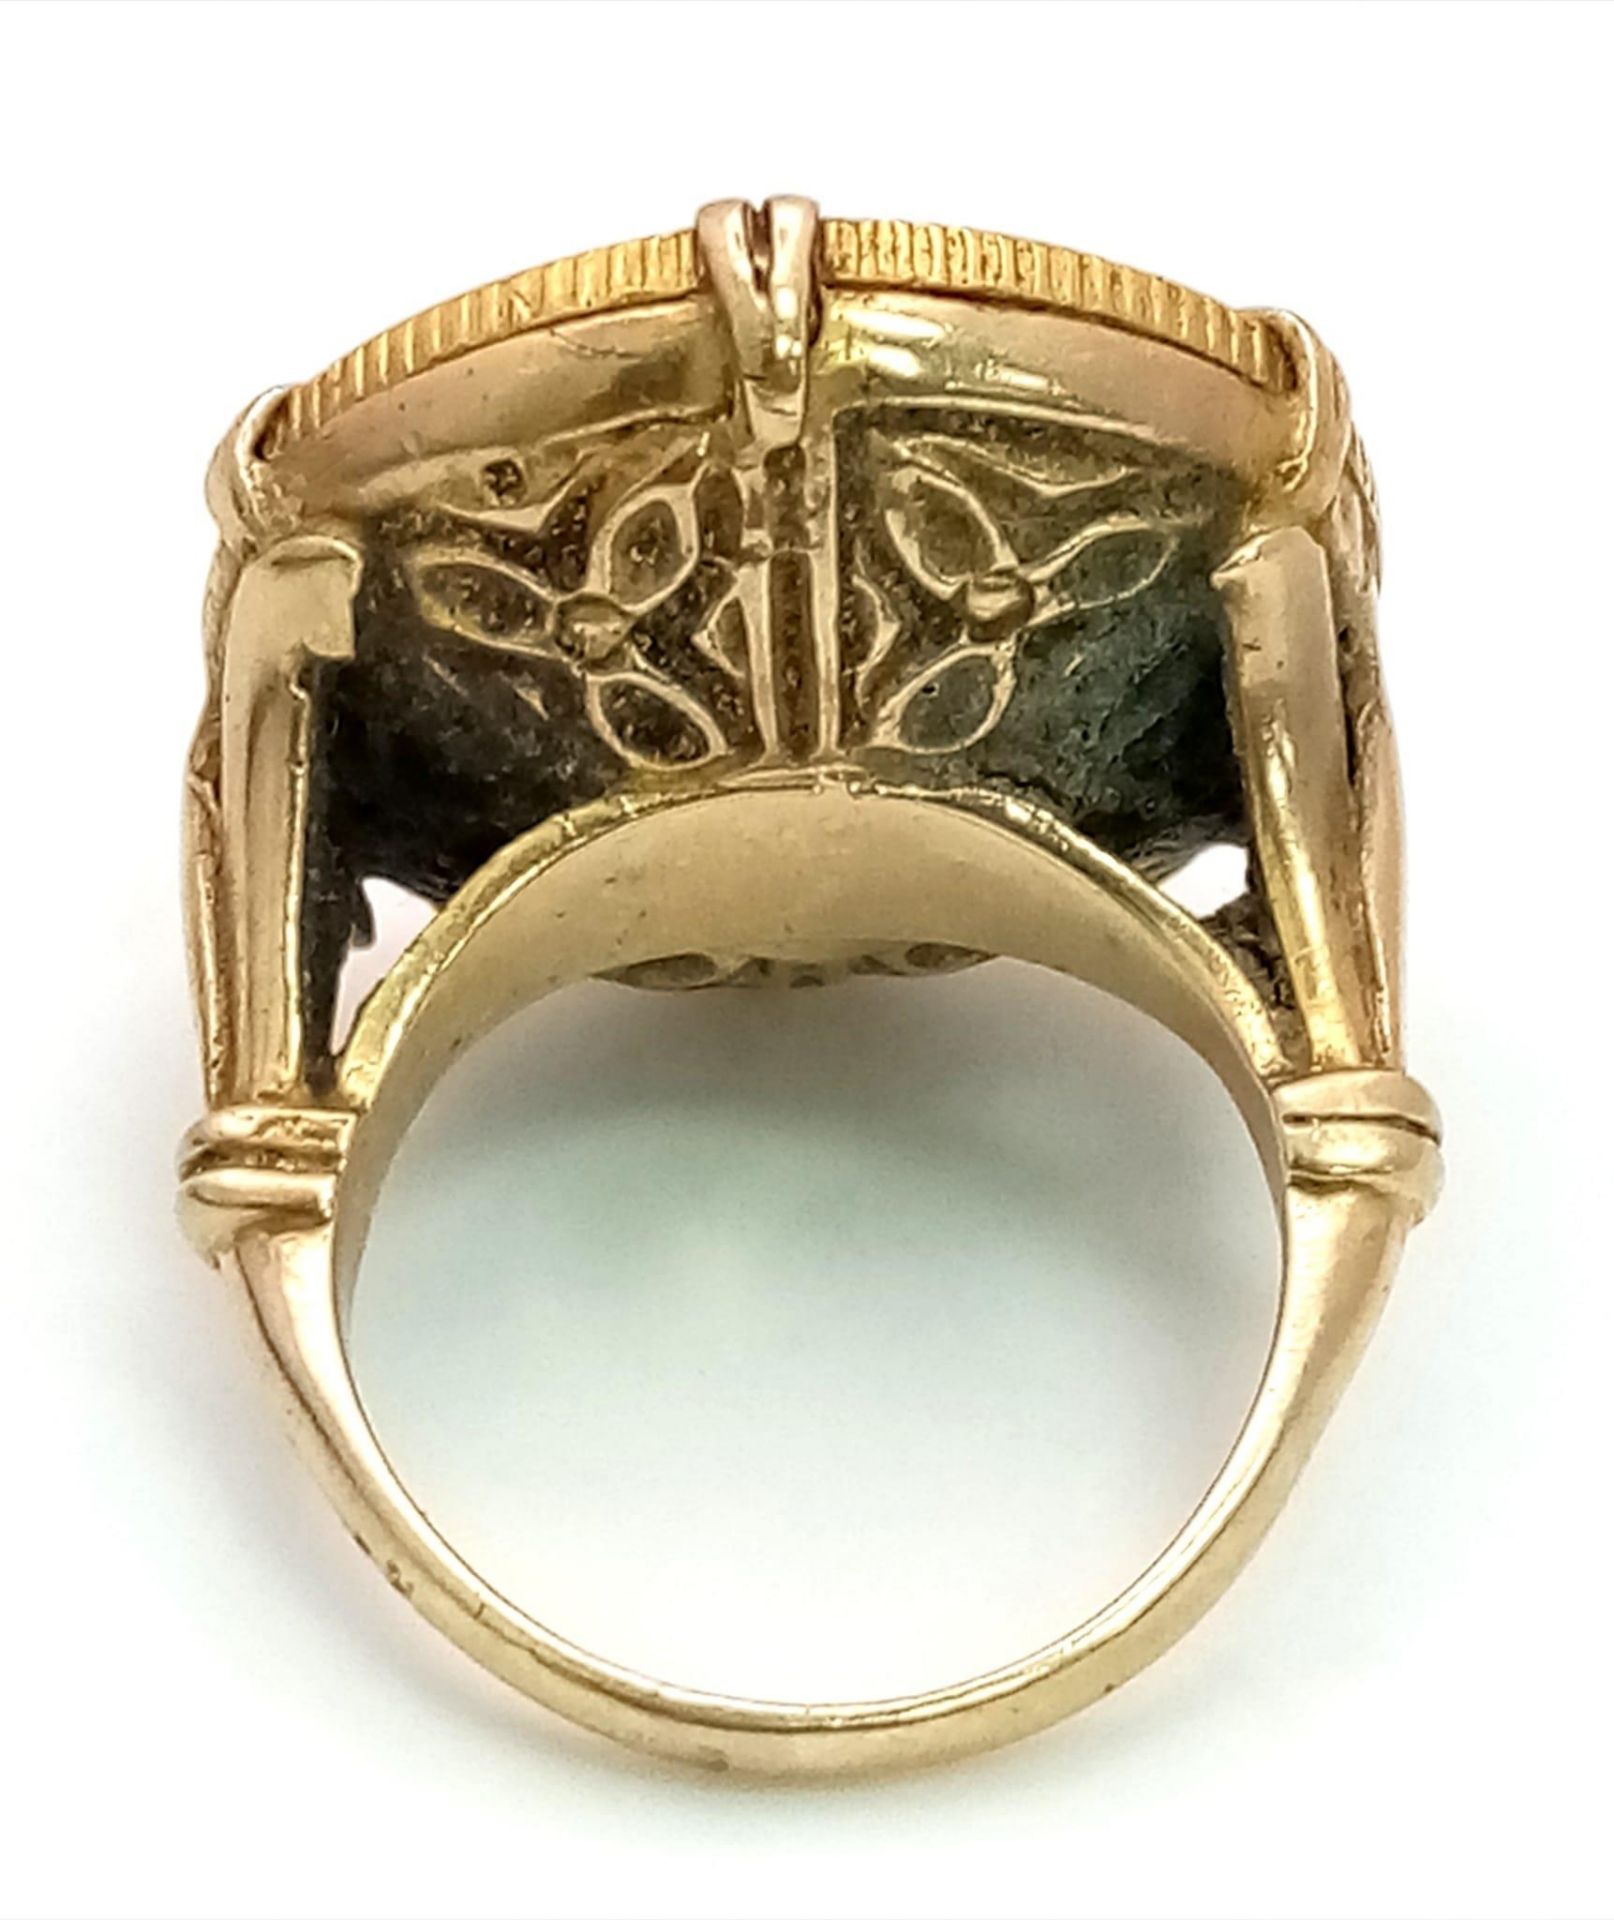 An Antique 1913 22K Gold Full Sovereign Ring set in a 9K Yellow Gold Well-Constructed Antique - Image 3 of 4